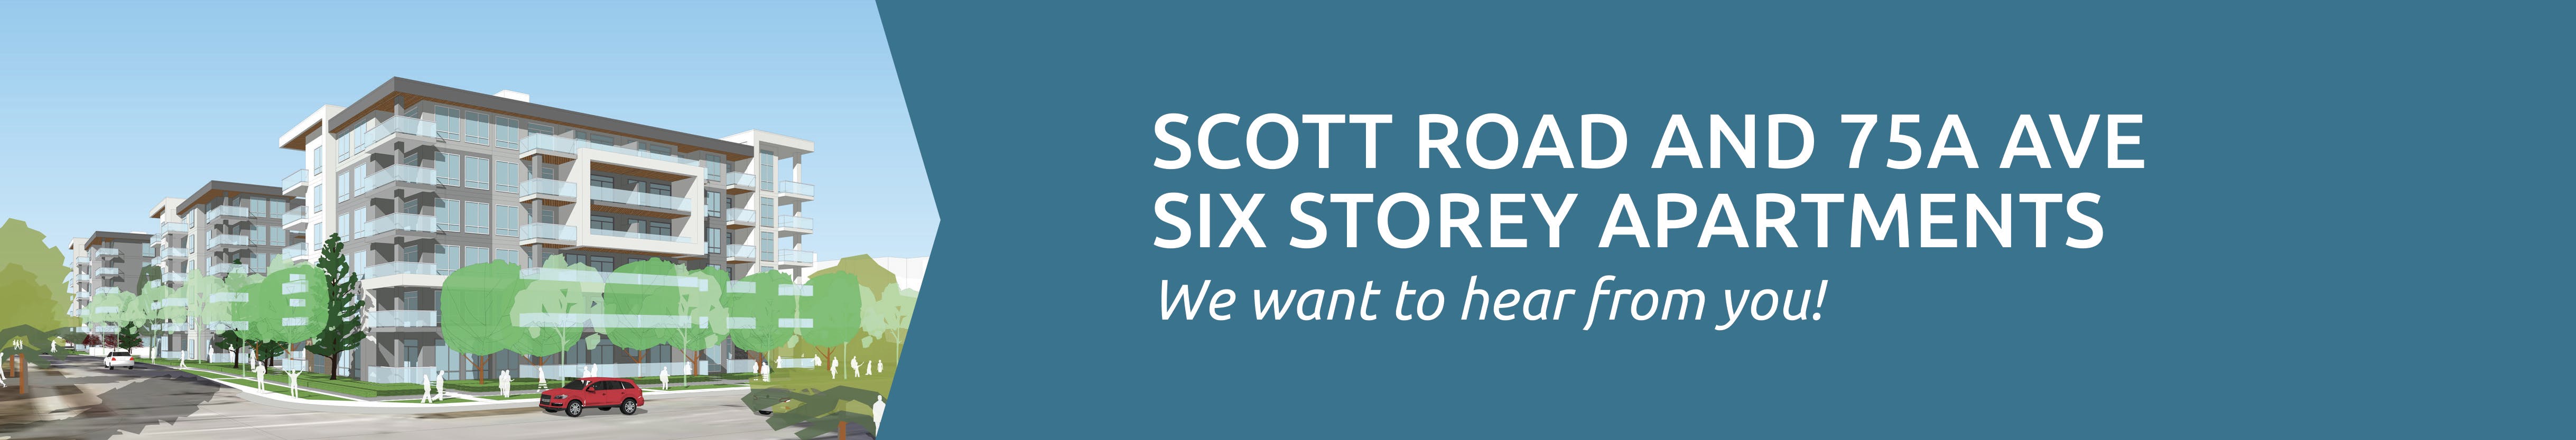 Scott Road and 75A Avenue Six Storey Apartments - we want to hear from you!